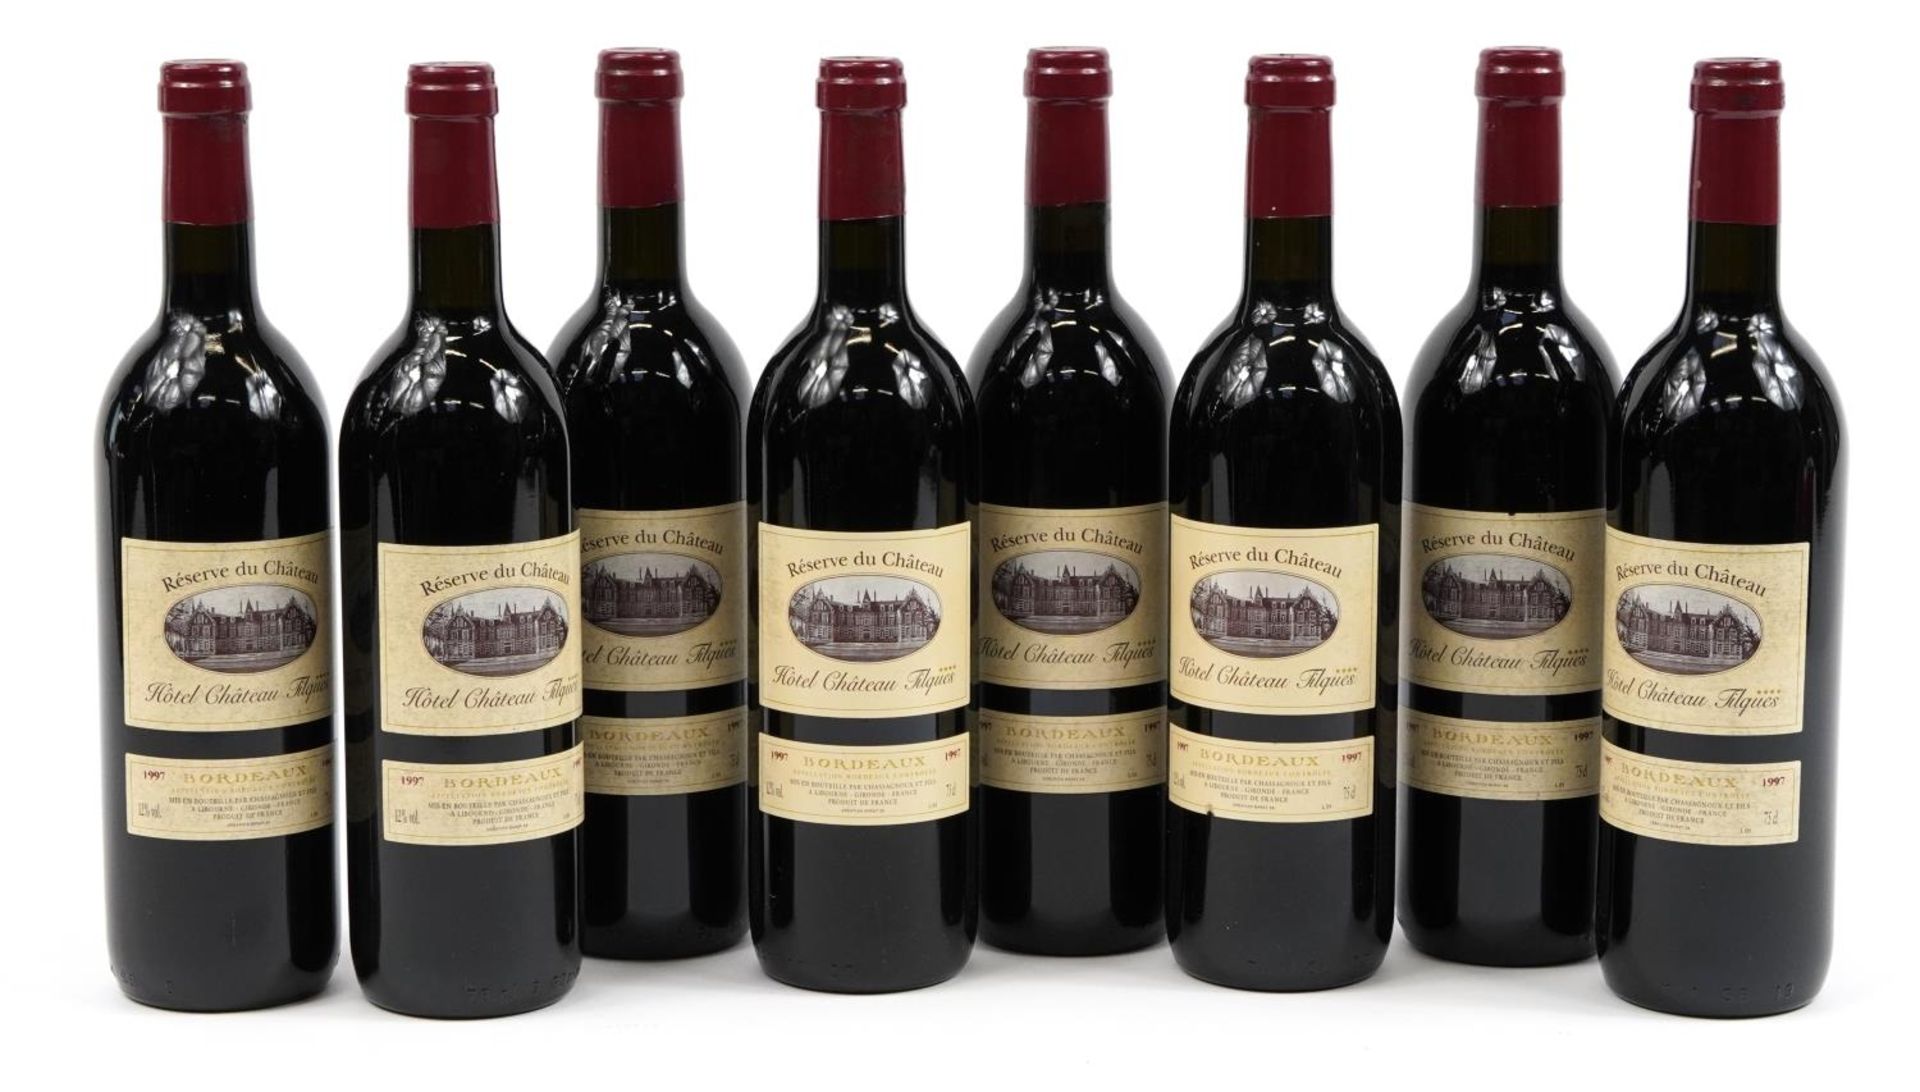 Eight bottles of 1997 Reserve du Chateau Hotel Chateau Tilques red wine